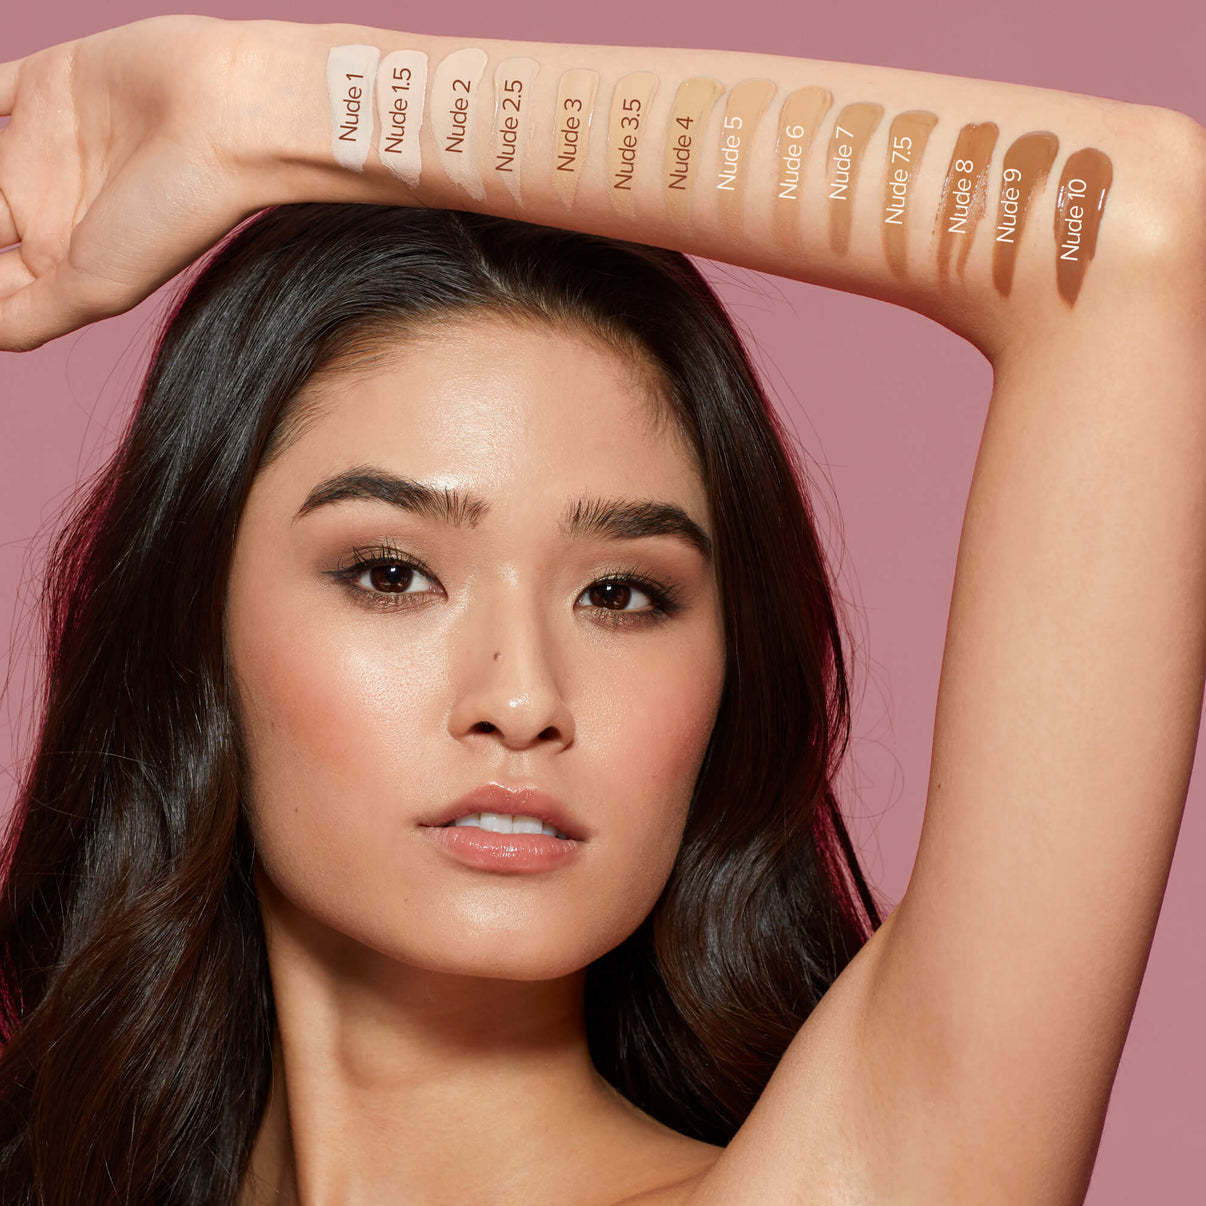 Young woman with swatches on her arm of Tinted Cover nude 6 and other shades